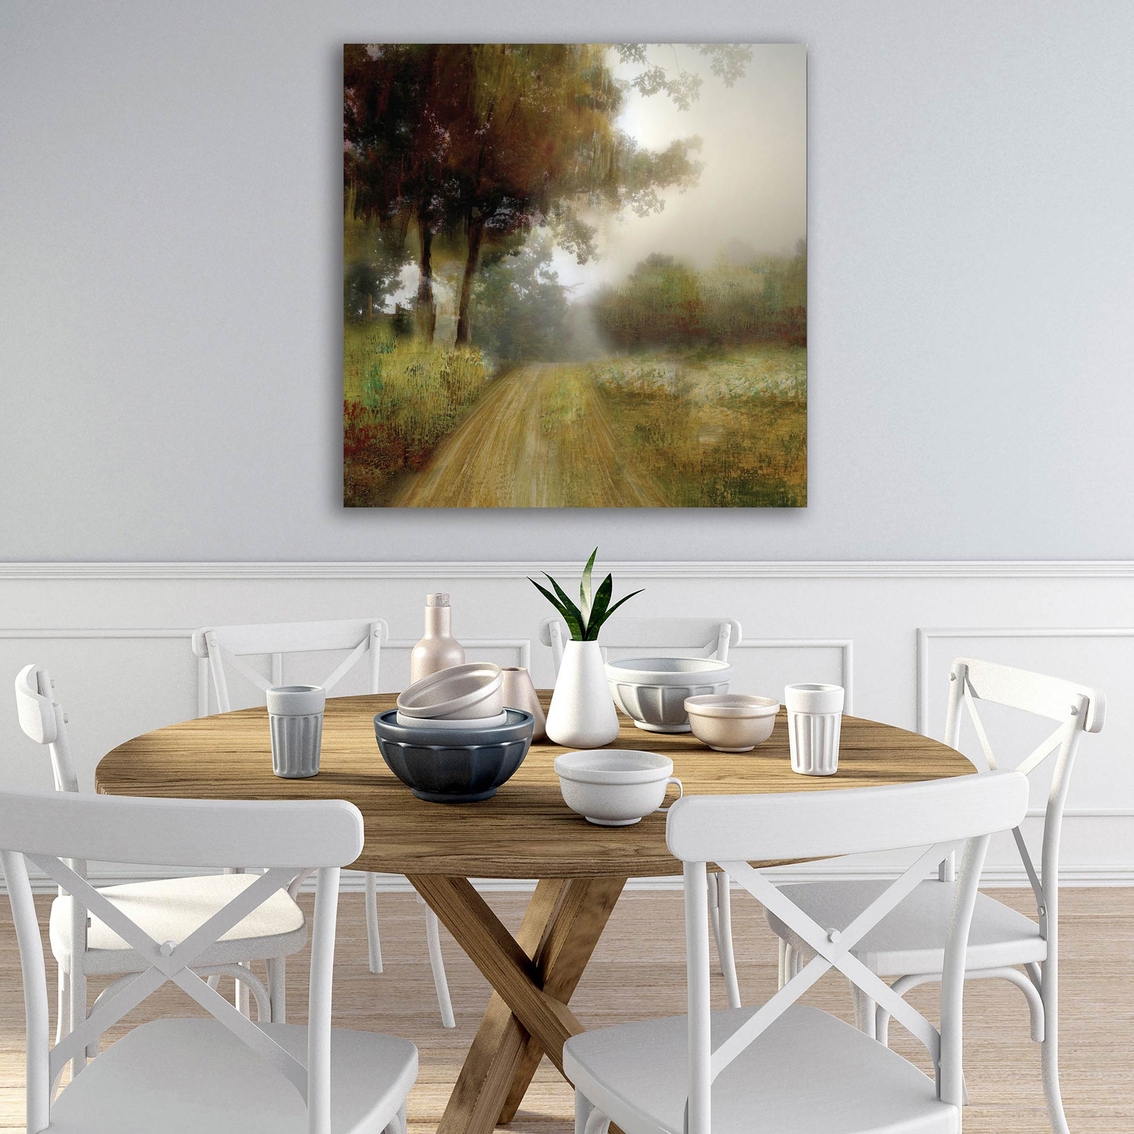 Courtside Market Country Road Canvas Wall Art - Image 7 of 7